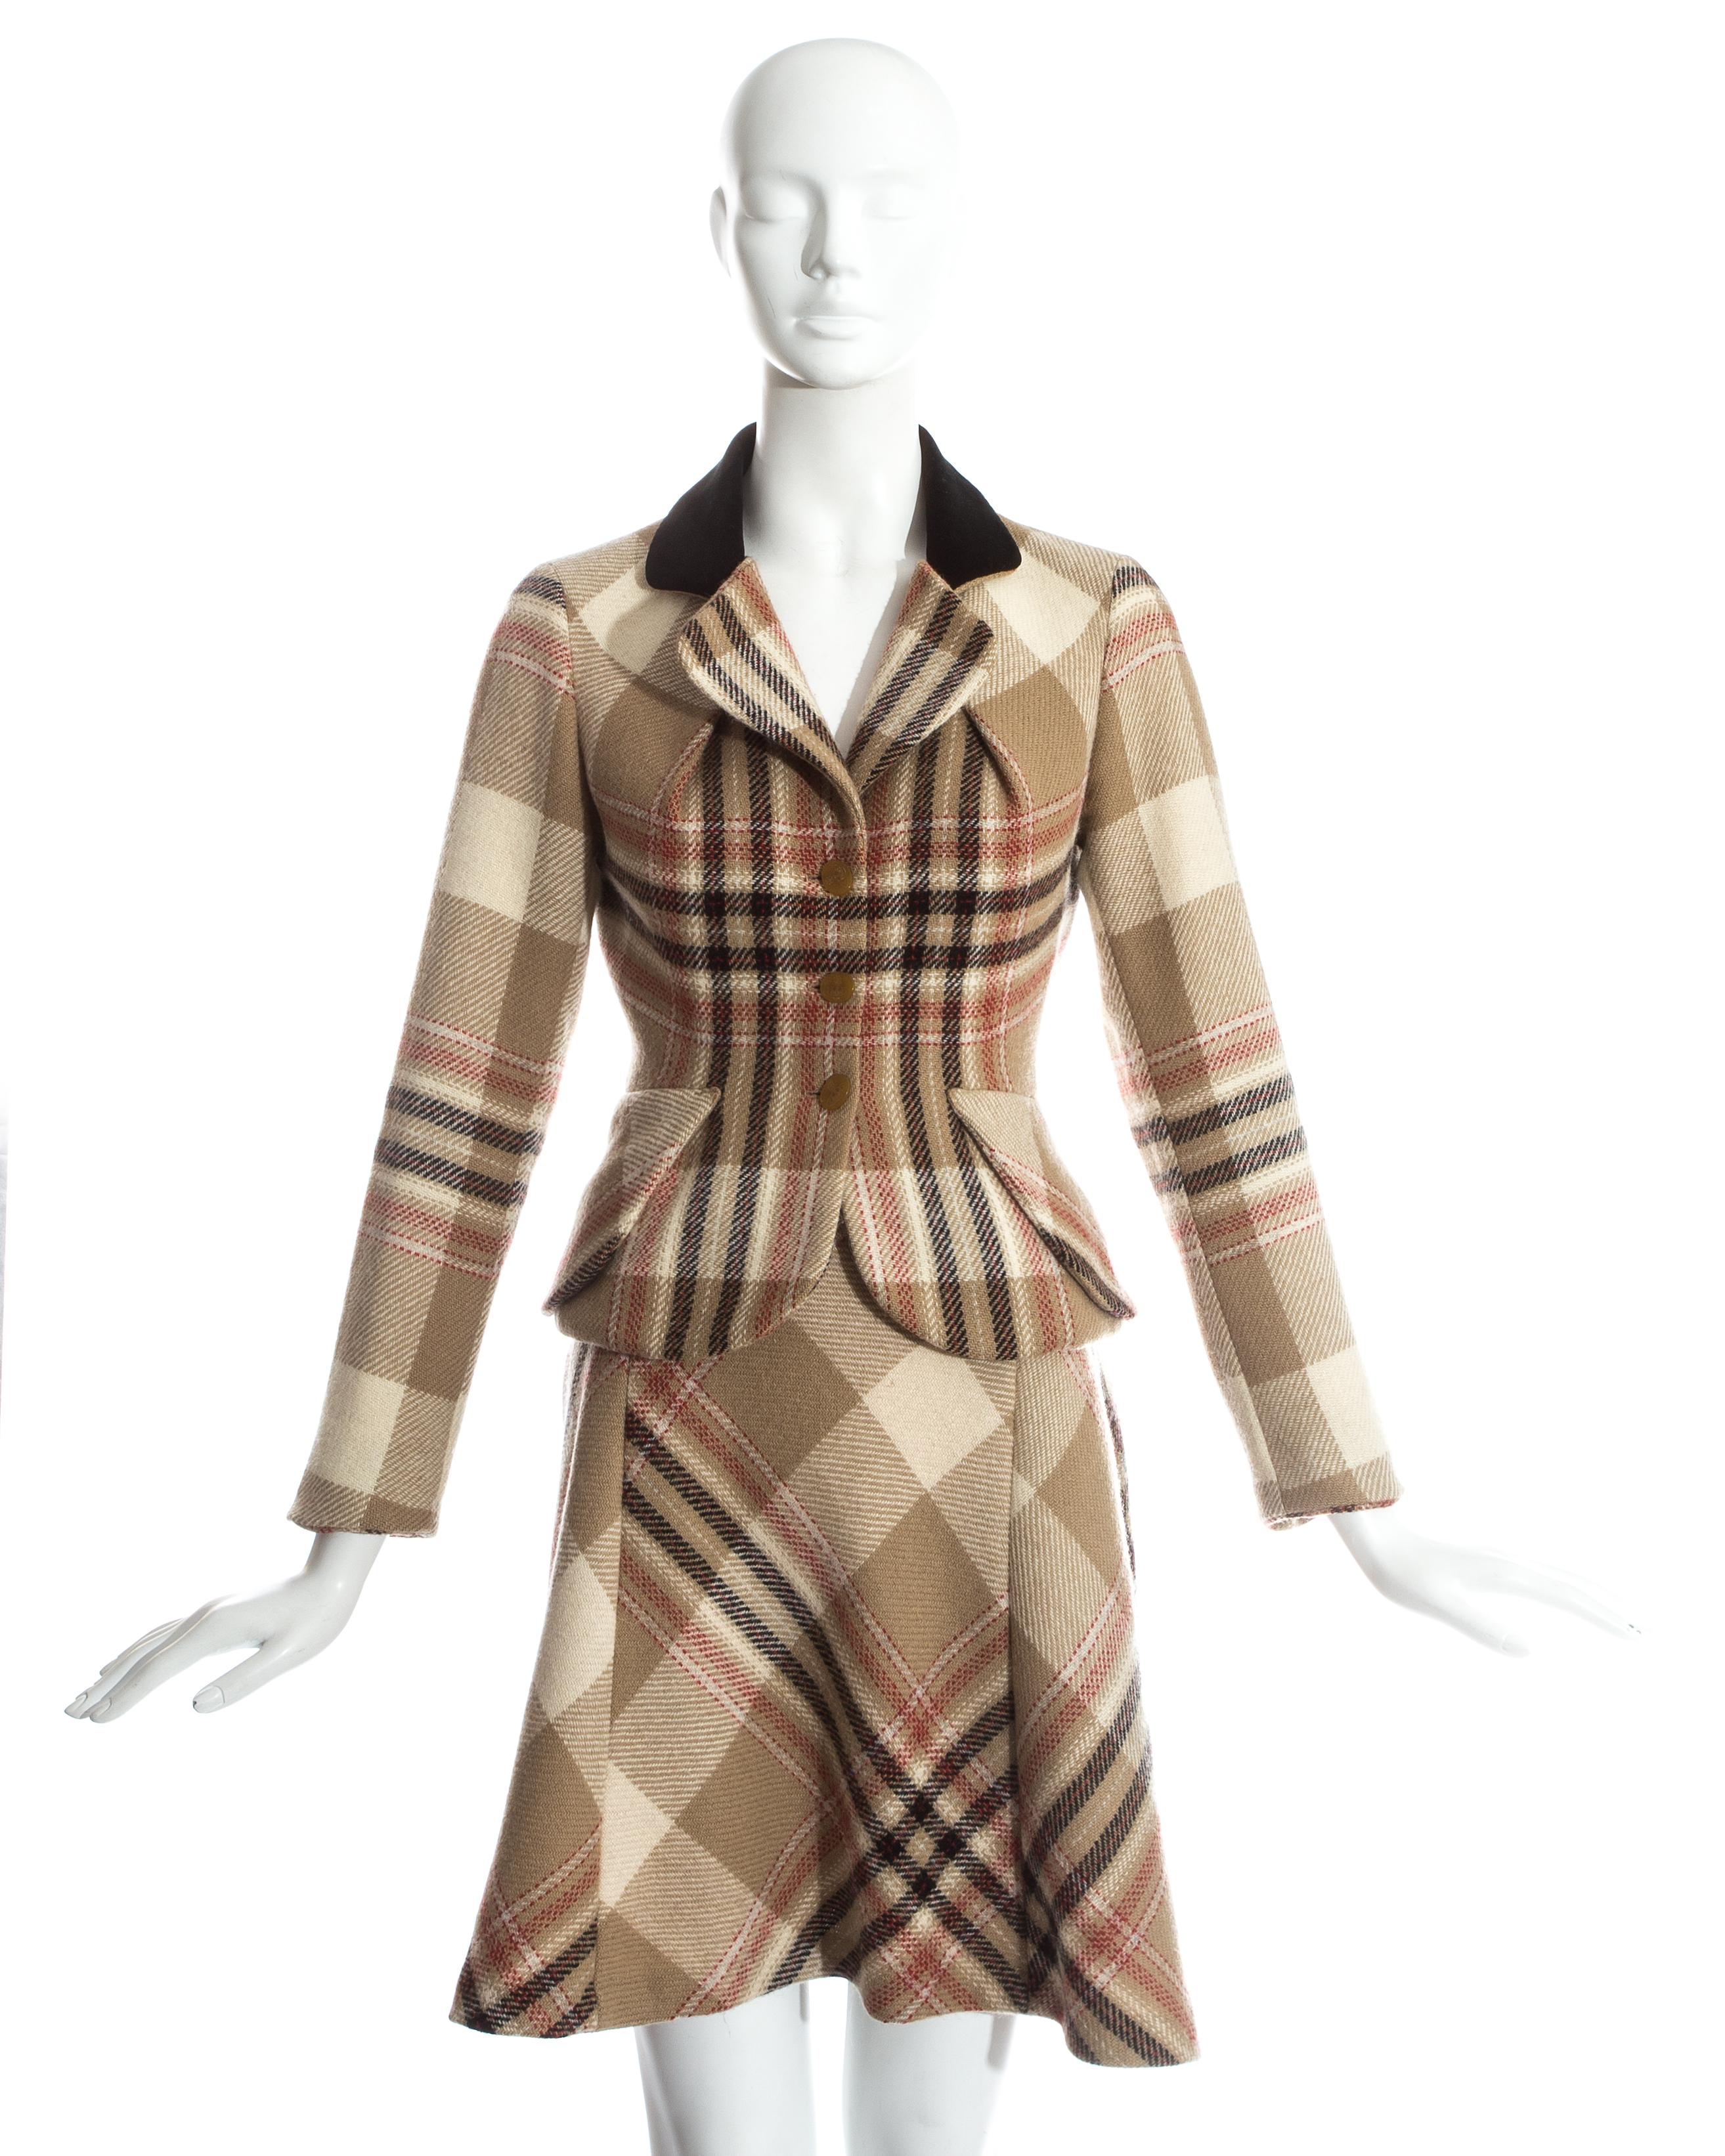 Vivienne Westwood tartan wool bustled skirt suit. Tailored blazer jacket with pleated bust, flap pockets and black velvet collar. Over the knee bustled skirt with gathering at the back.

c. 1993-1994